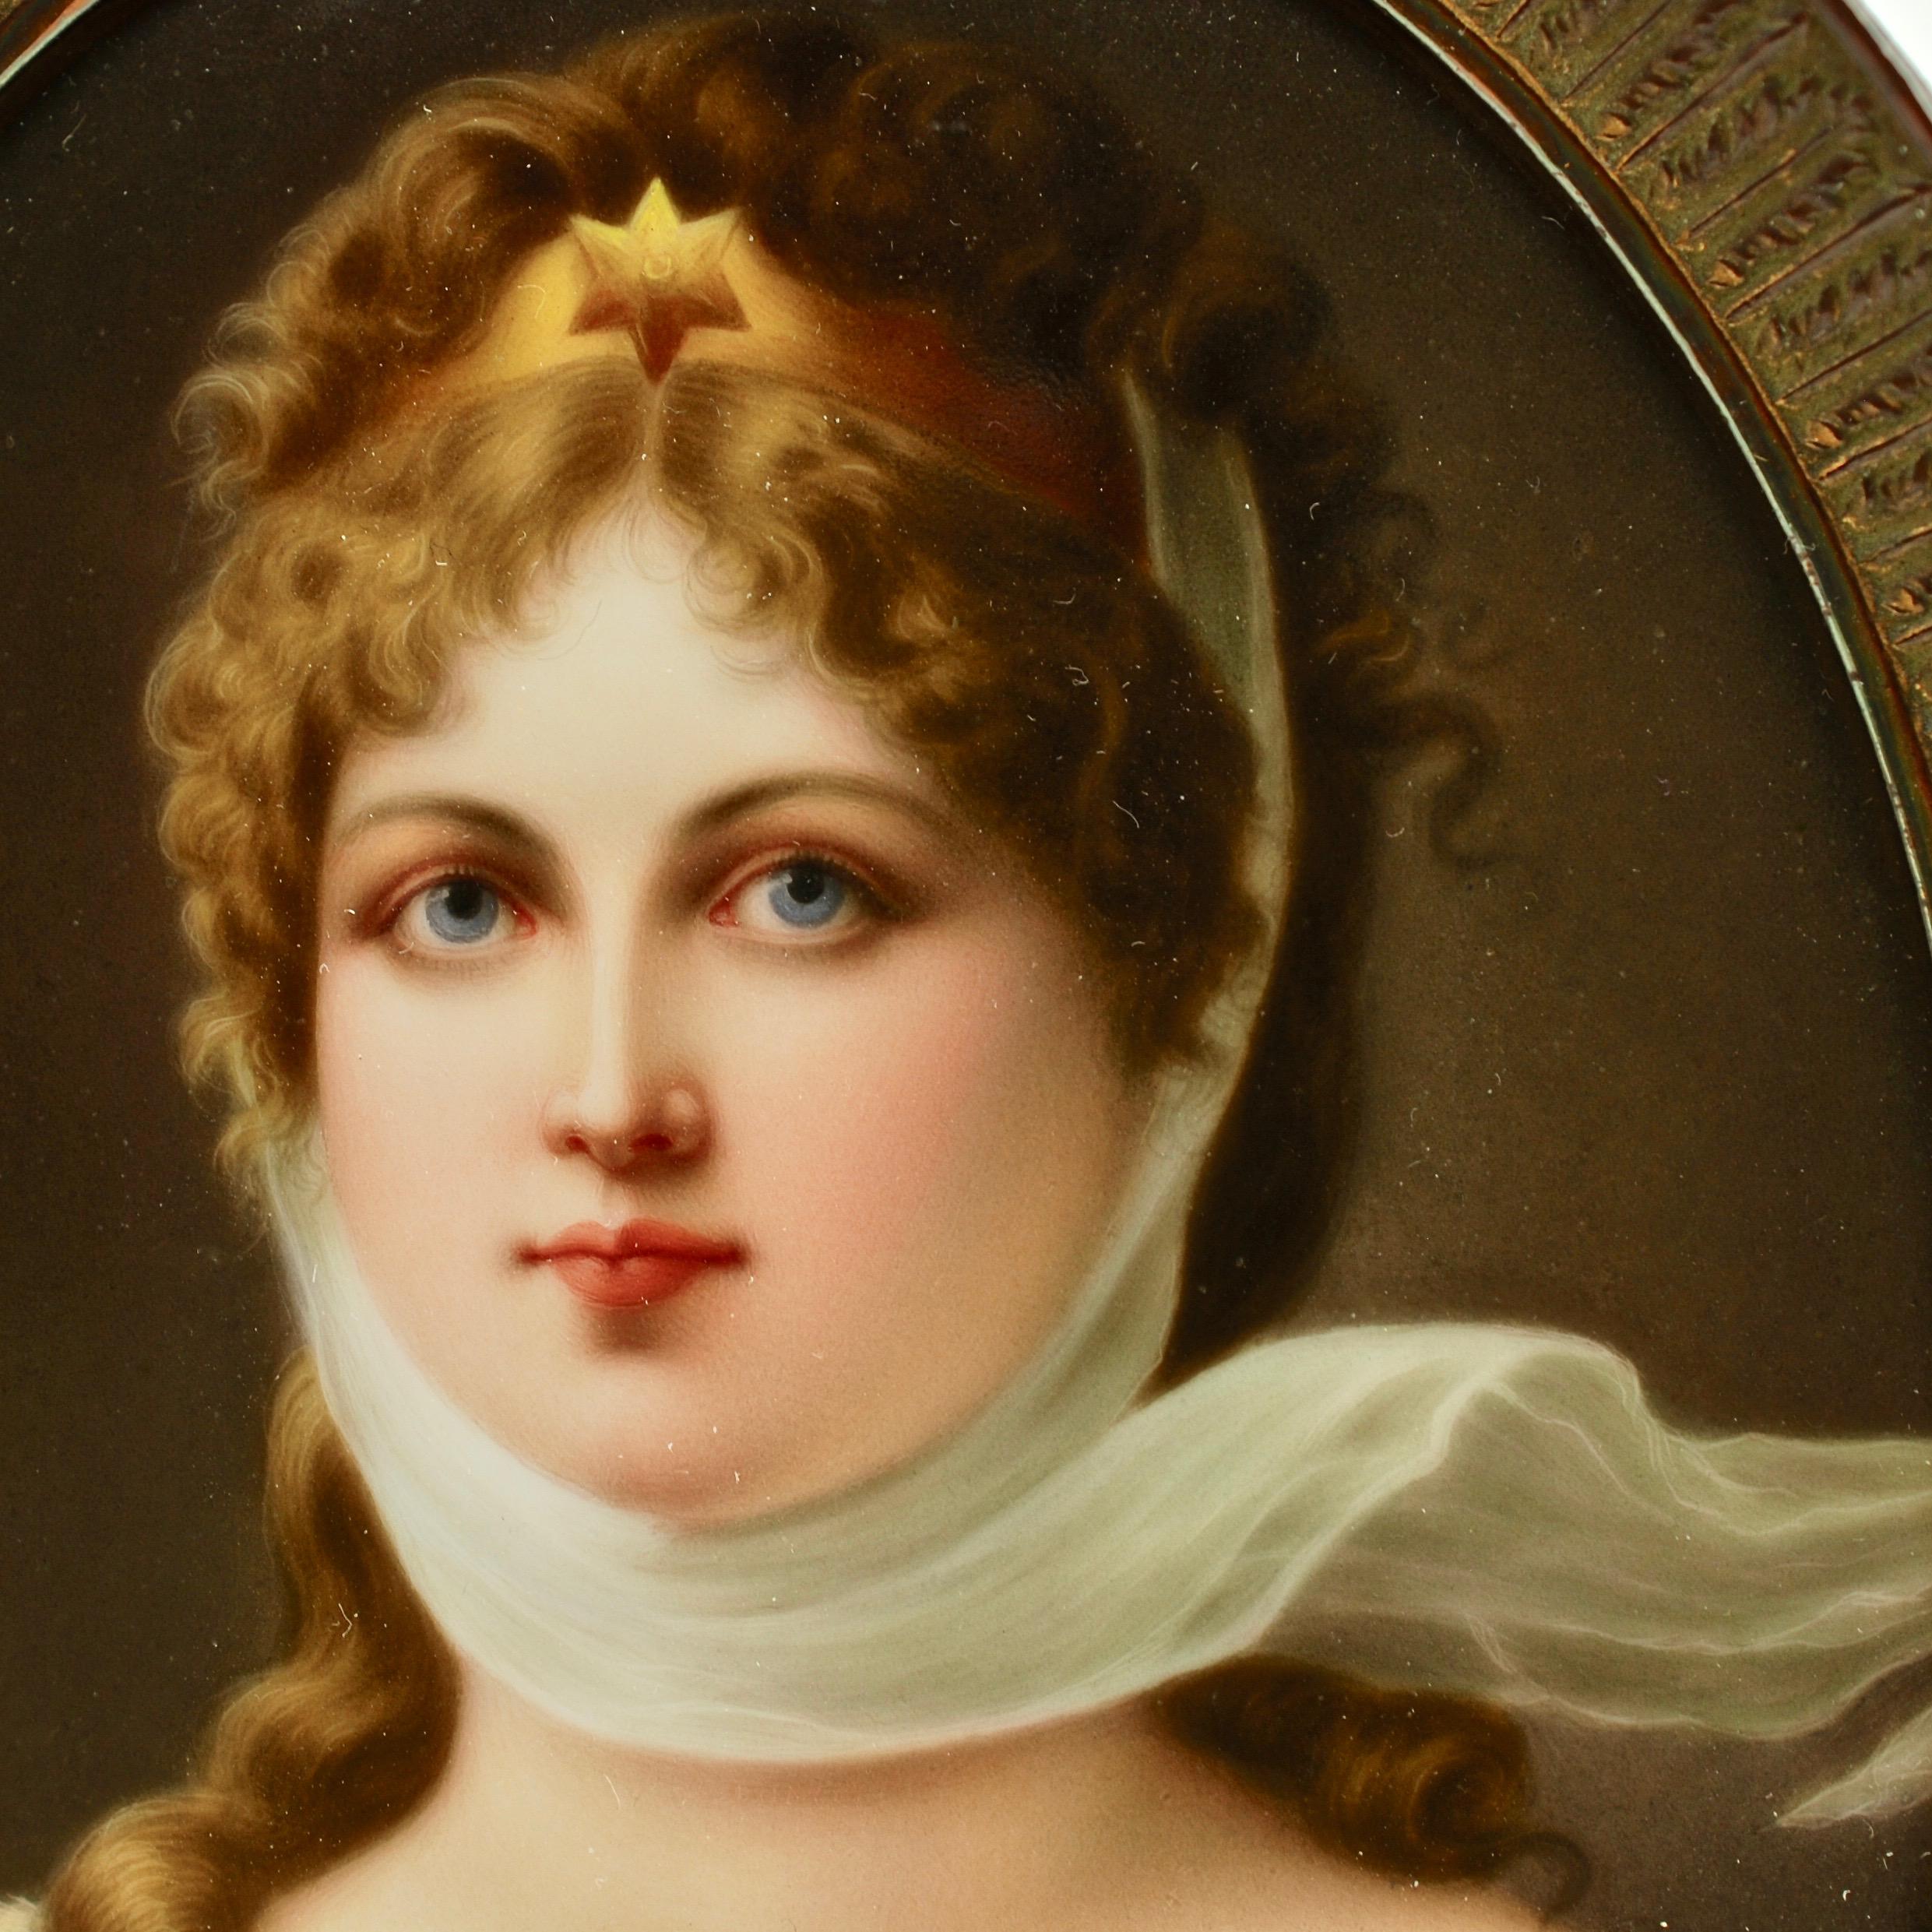 German Wagner CM Hutschenreuther Hand Painted Porcelain Plaque Queen Louisa of Prussia